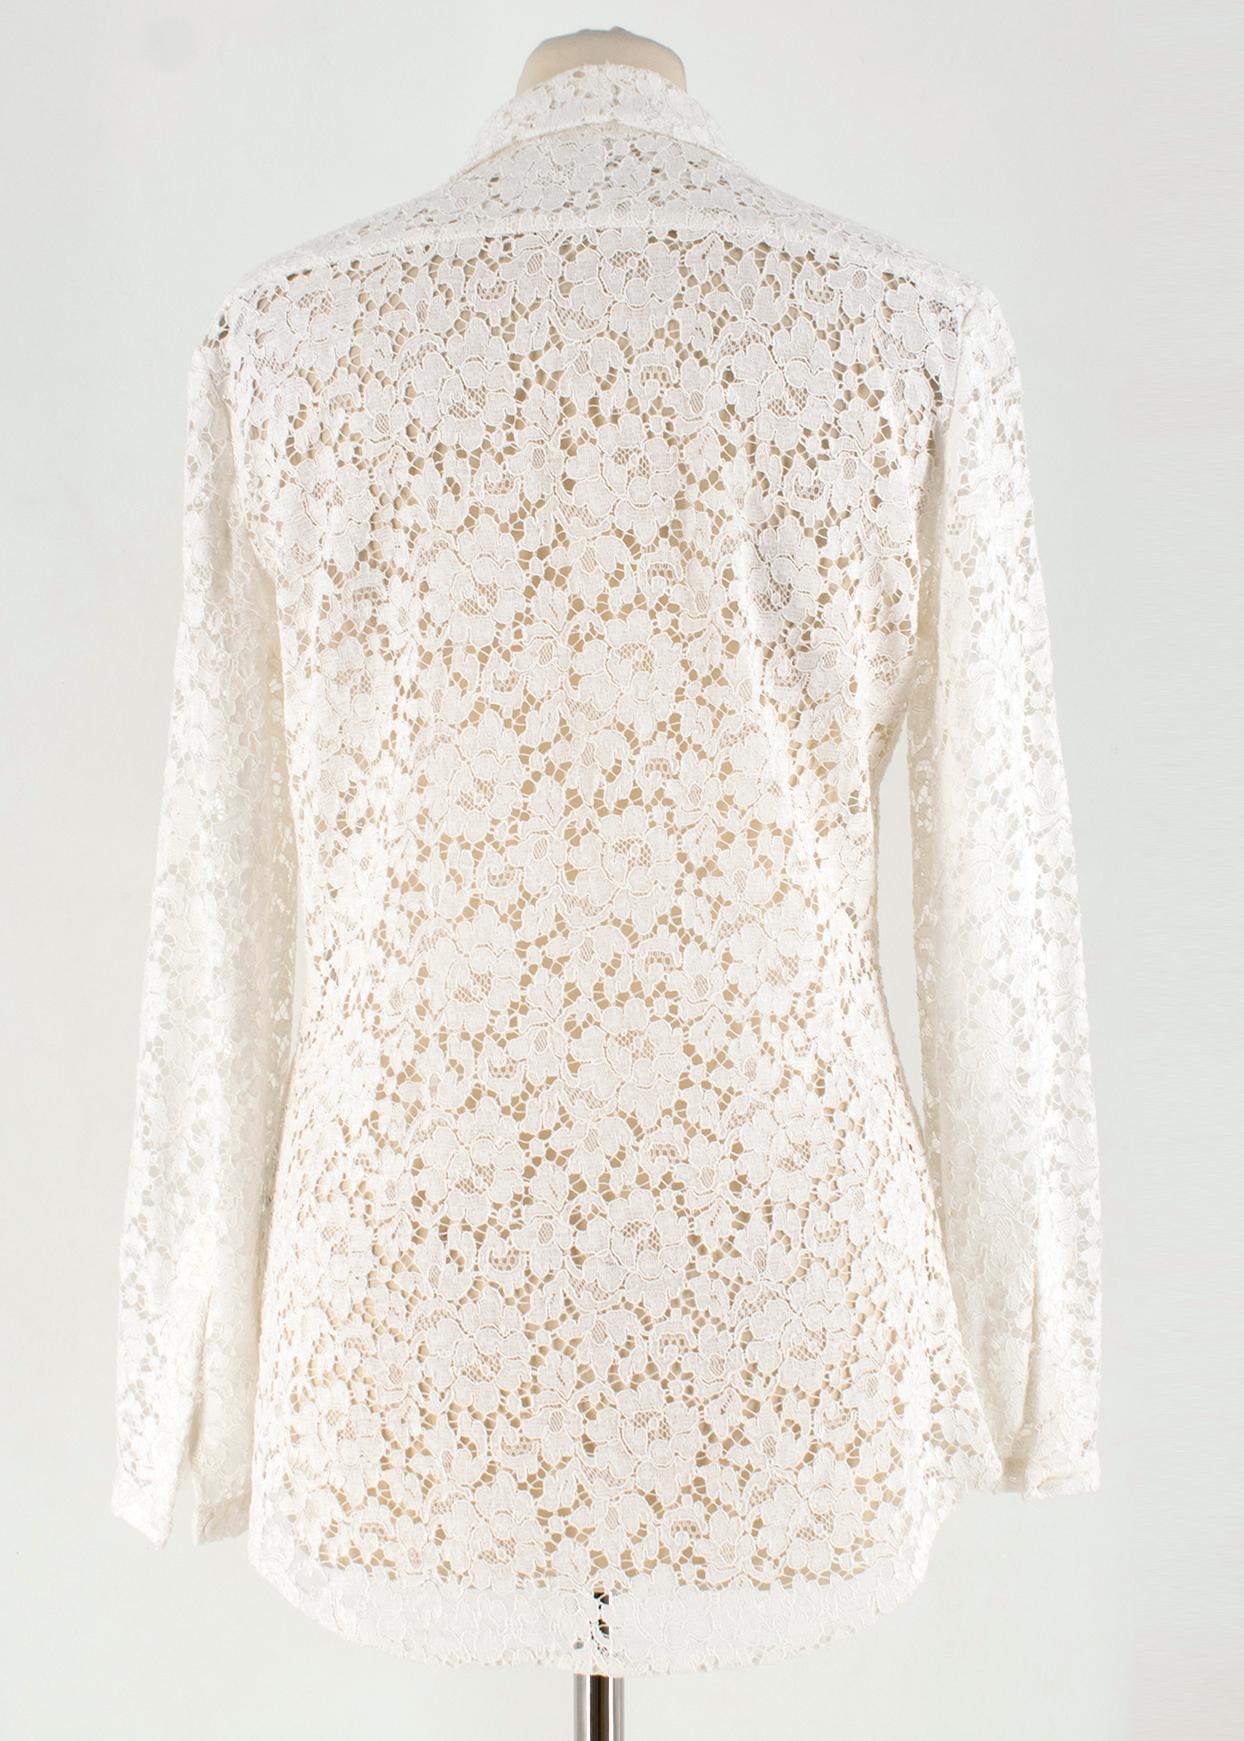 burberry lace shirt